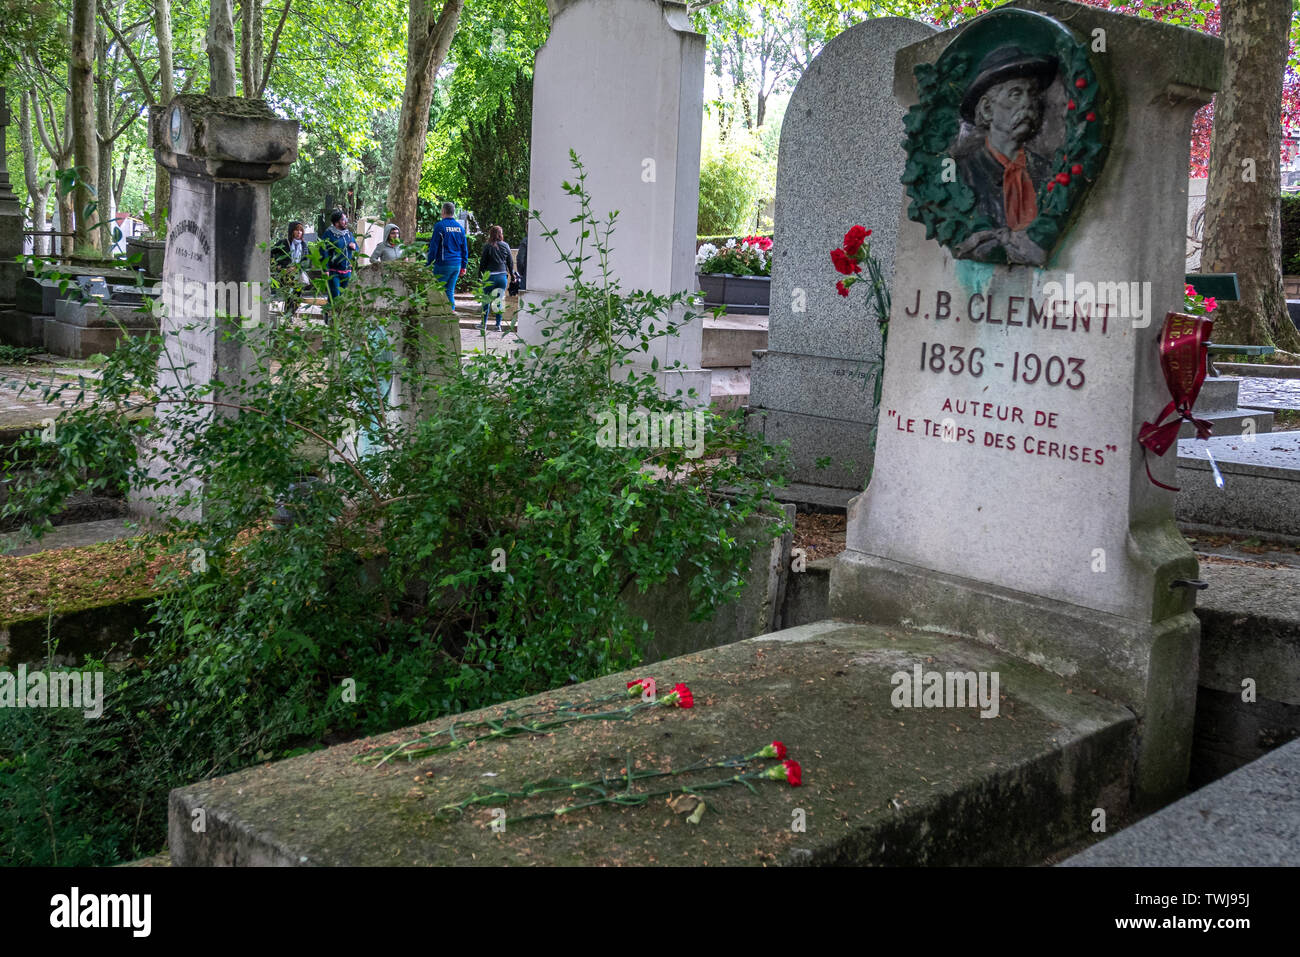 Paris, France - May 28, 2019: Jean Baptiste Clement tomb at the Pére Lachaise cemetery. Stock Photo